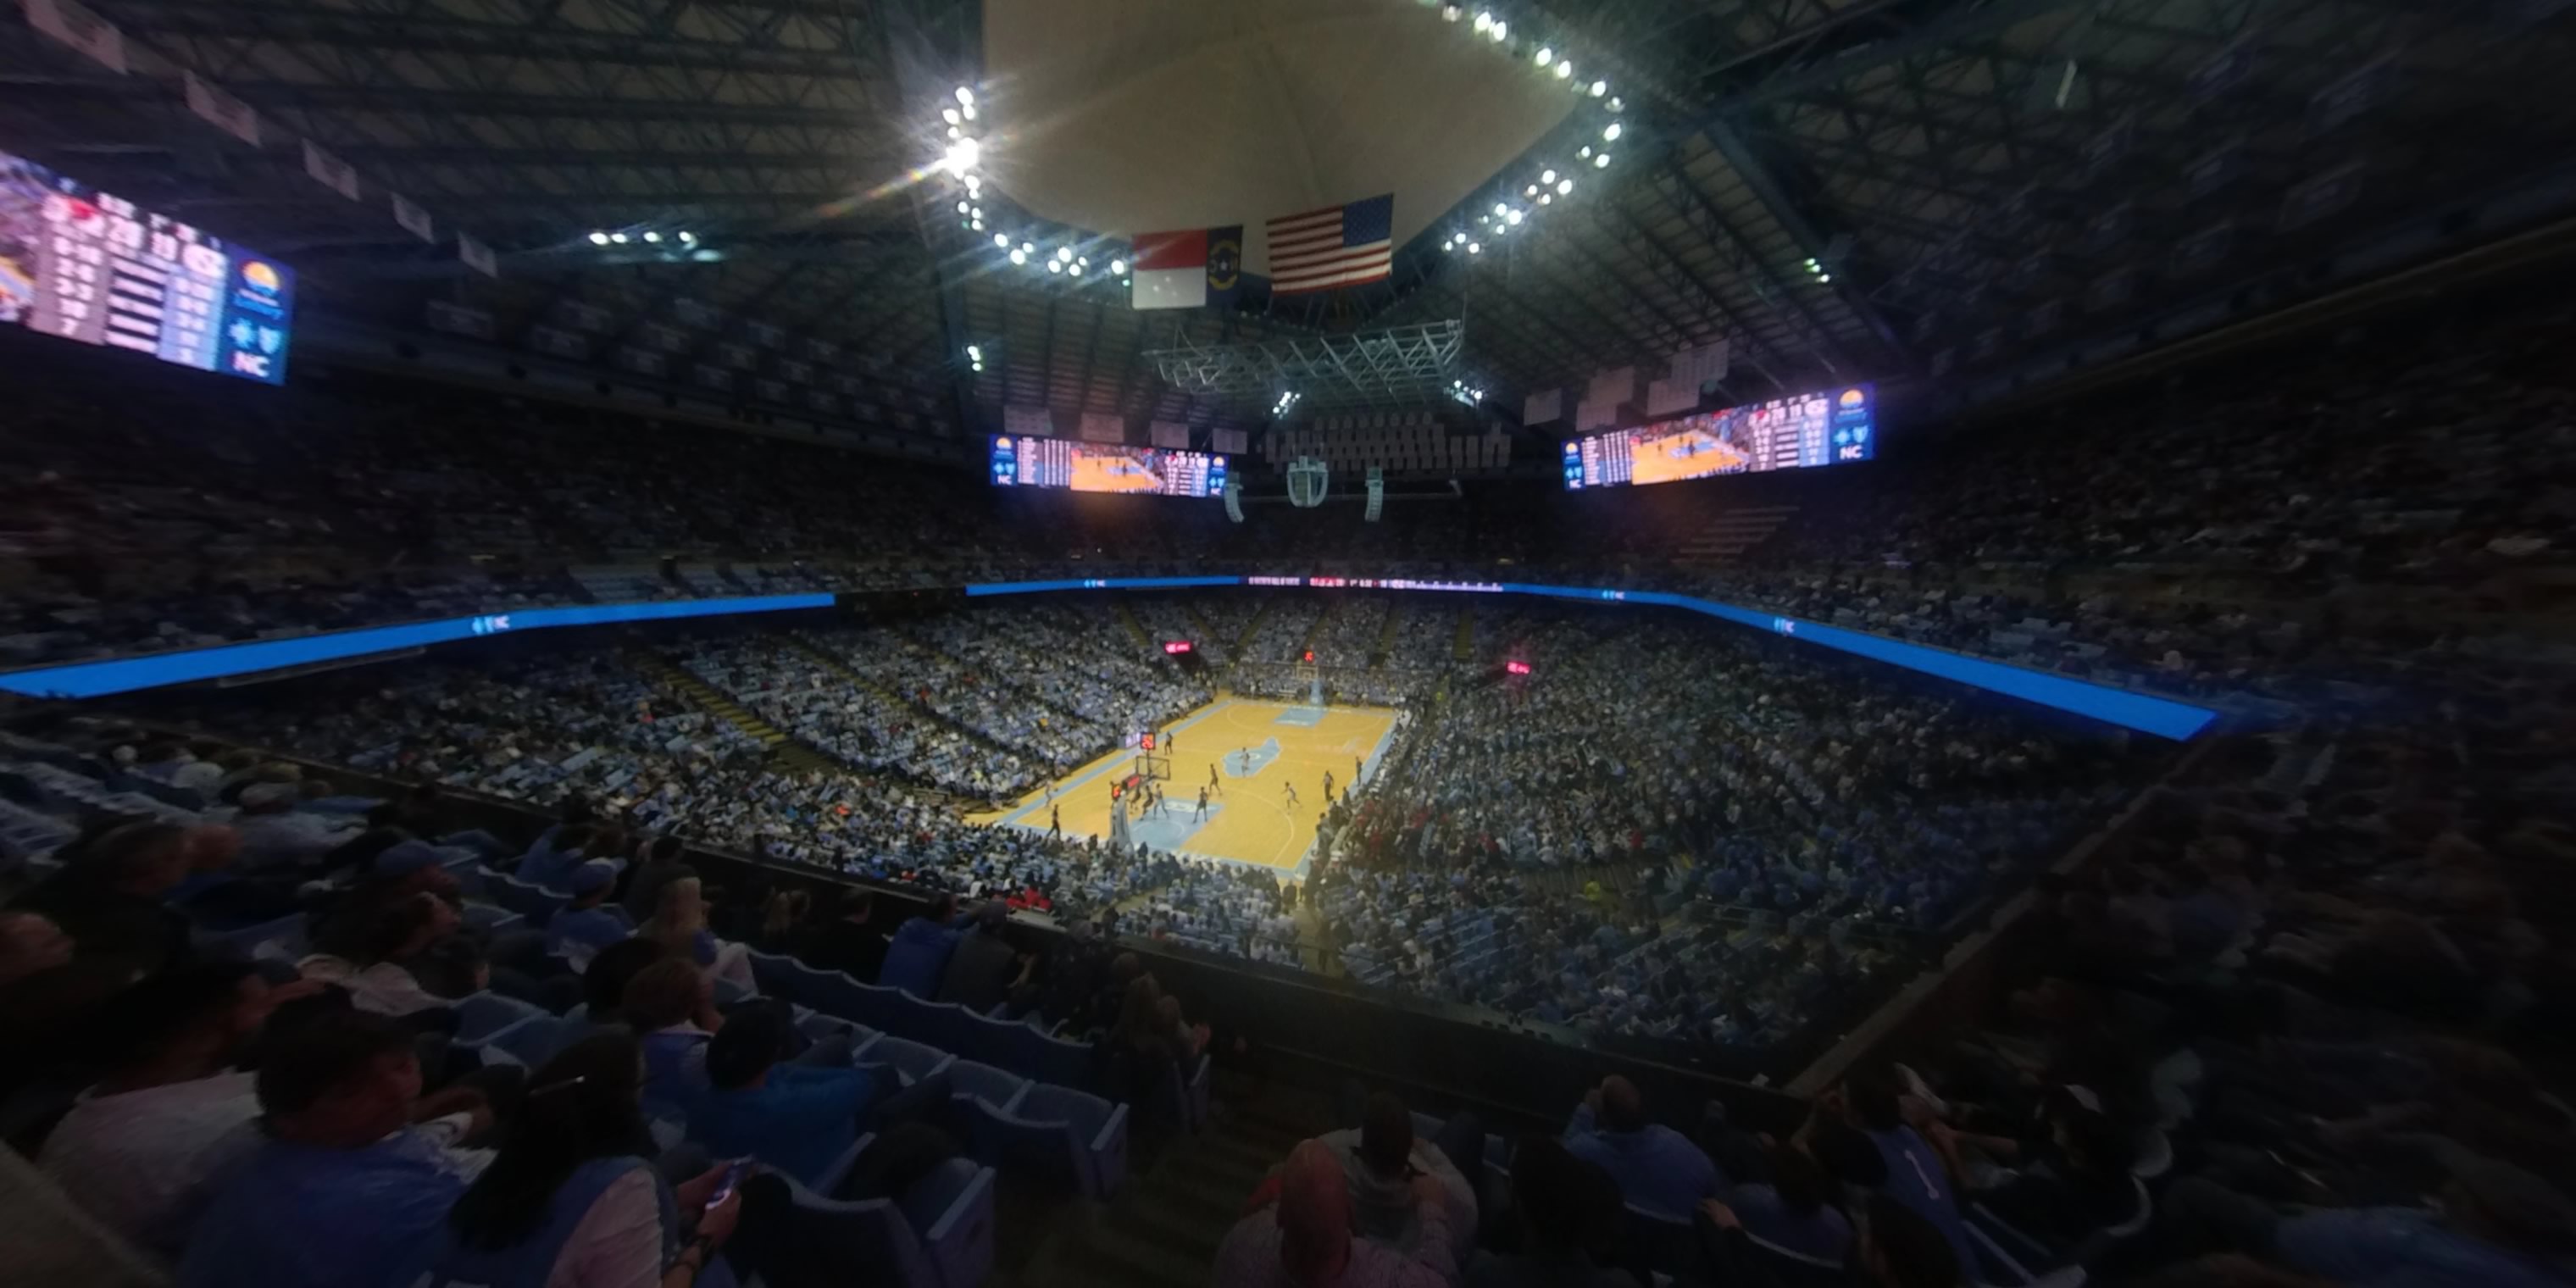 section 201 panoramic seat view  - dean smith center